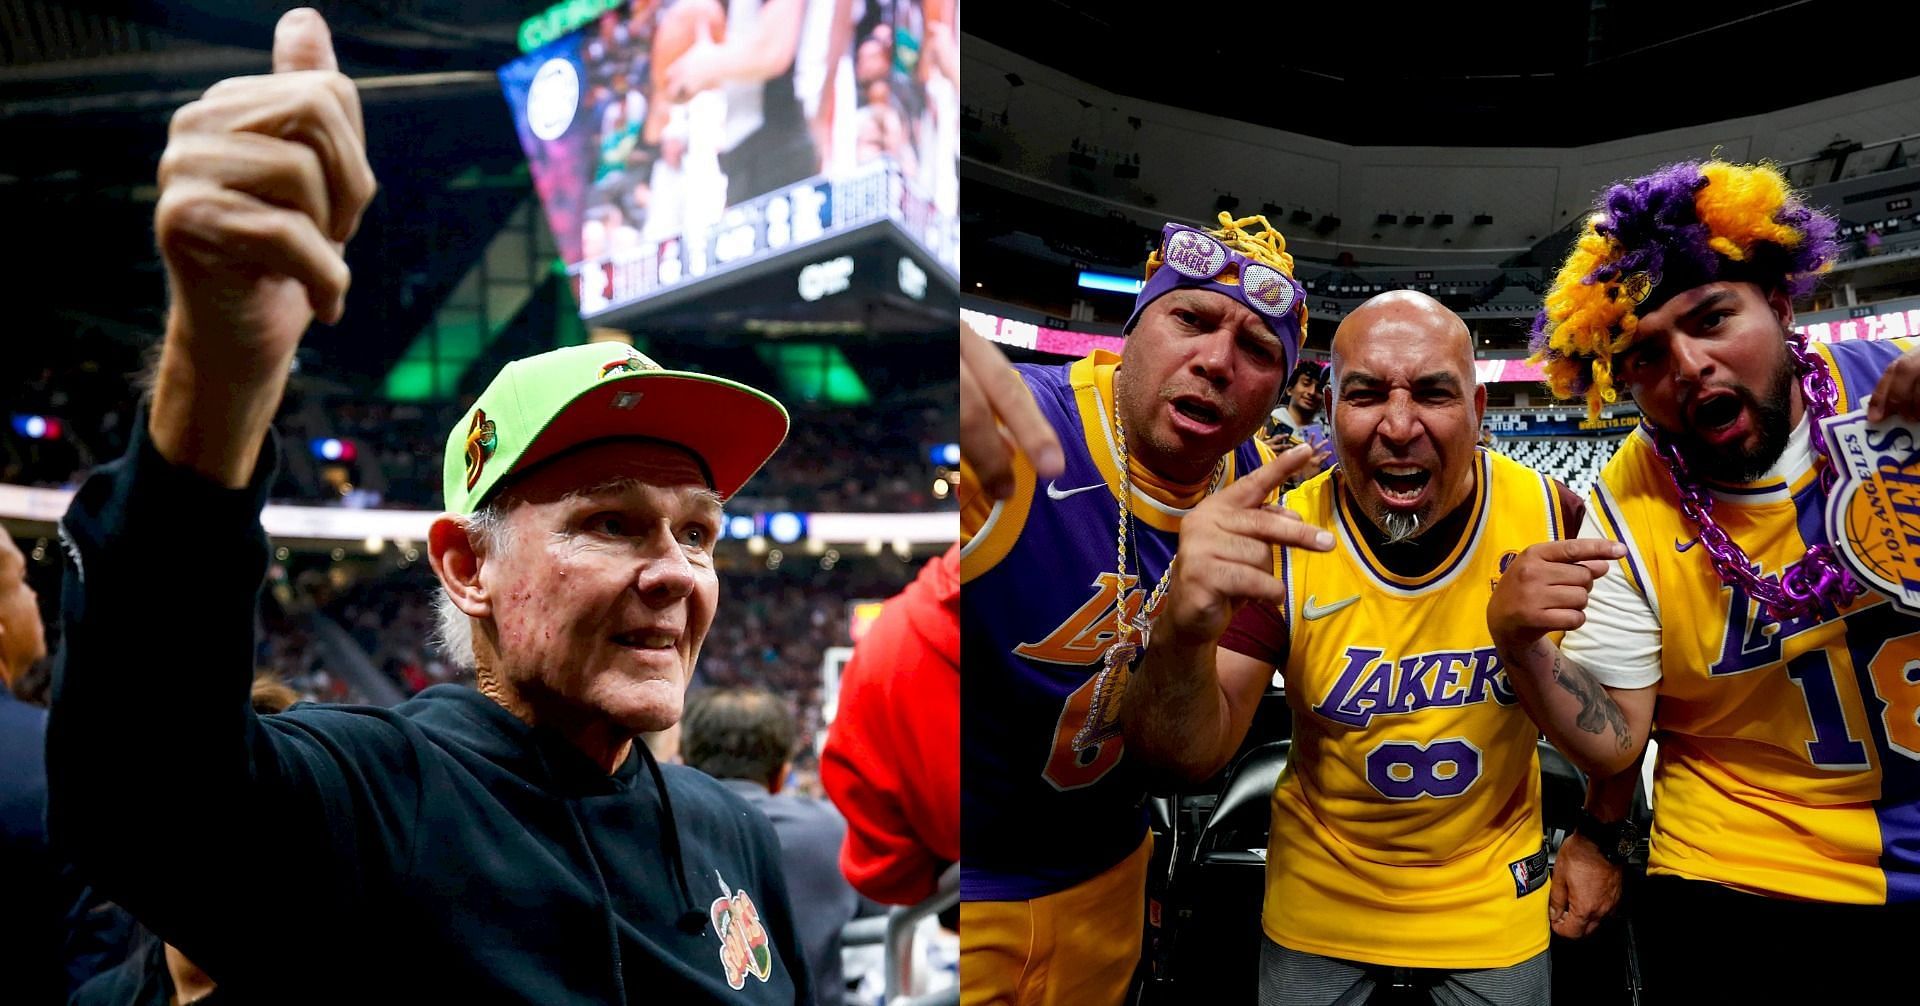 George Karl takes no prisoners while addressing Lakers fans